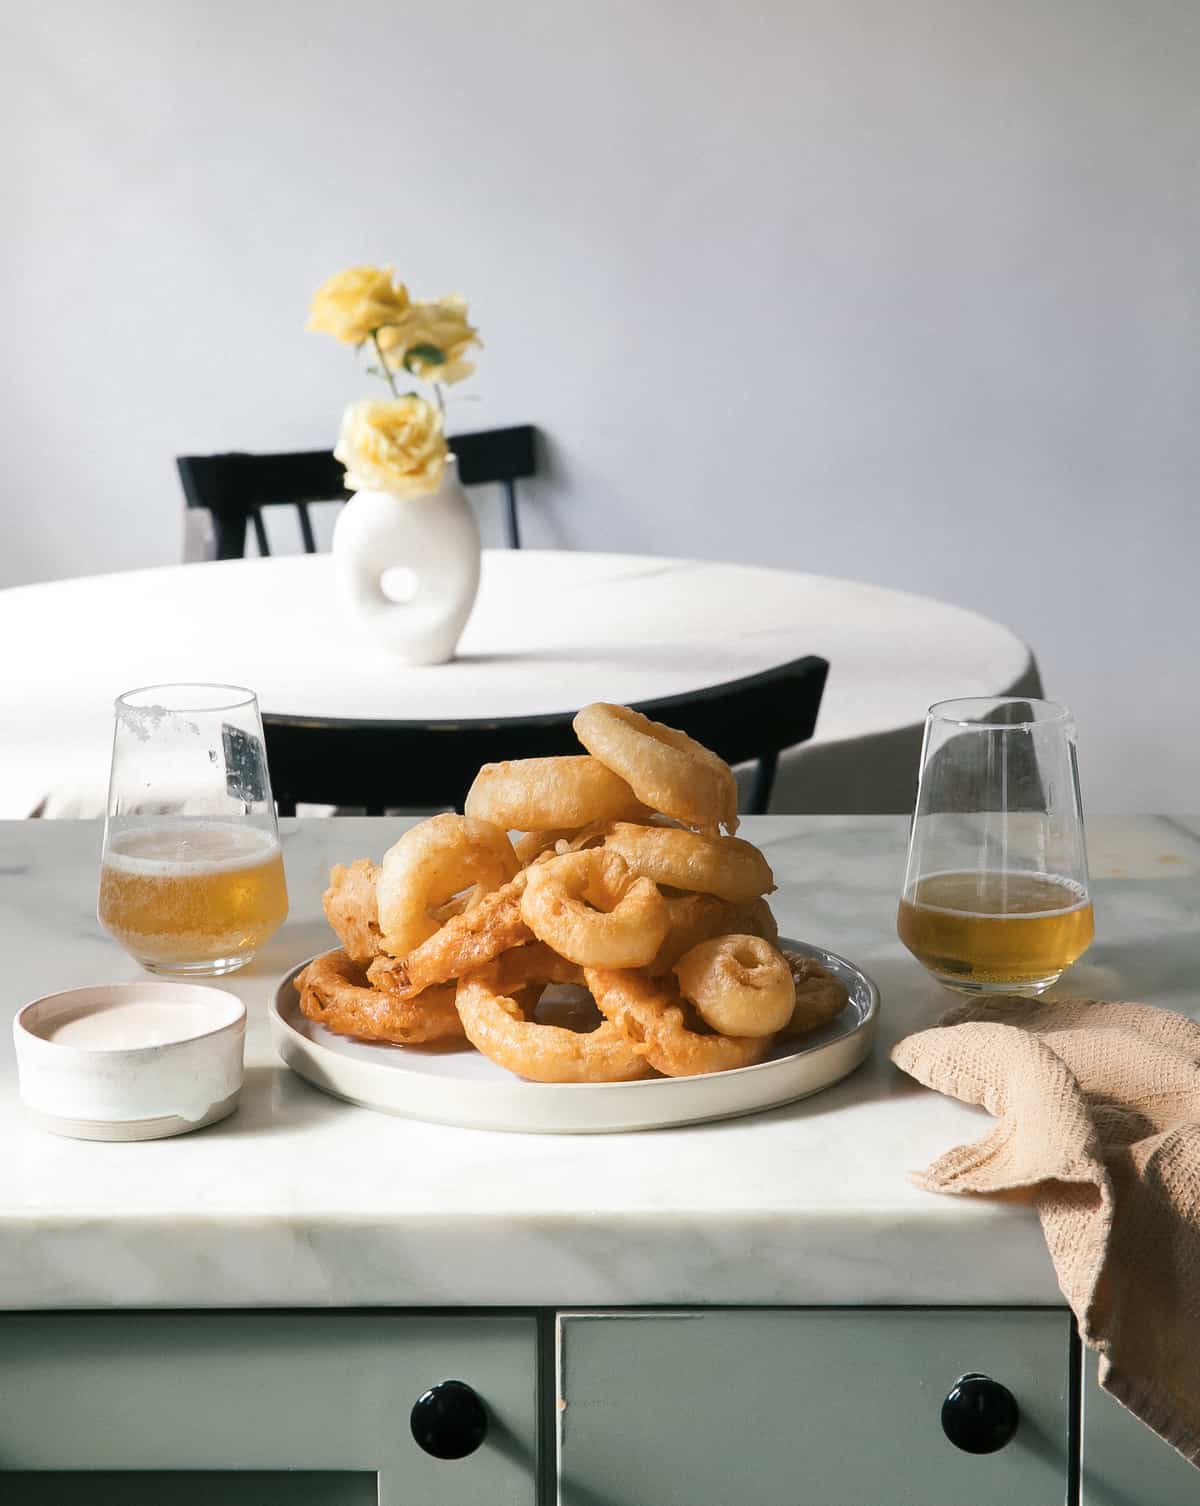 Beer Battered Onion Rings on plate.